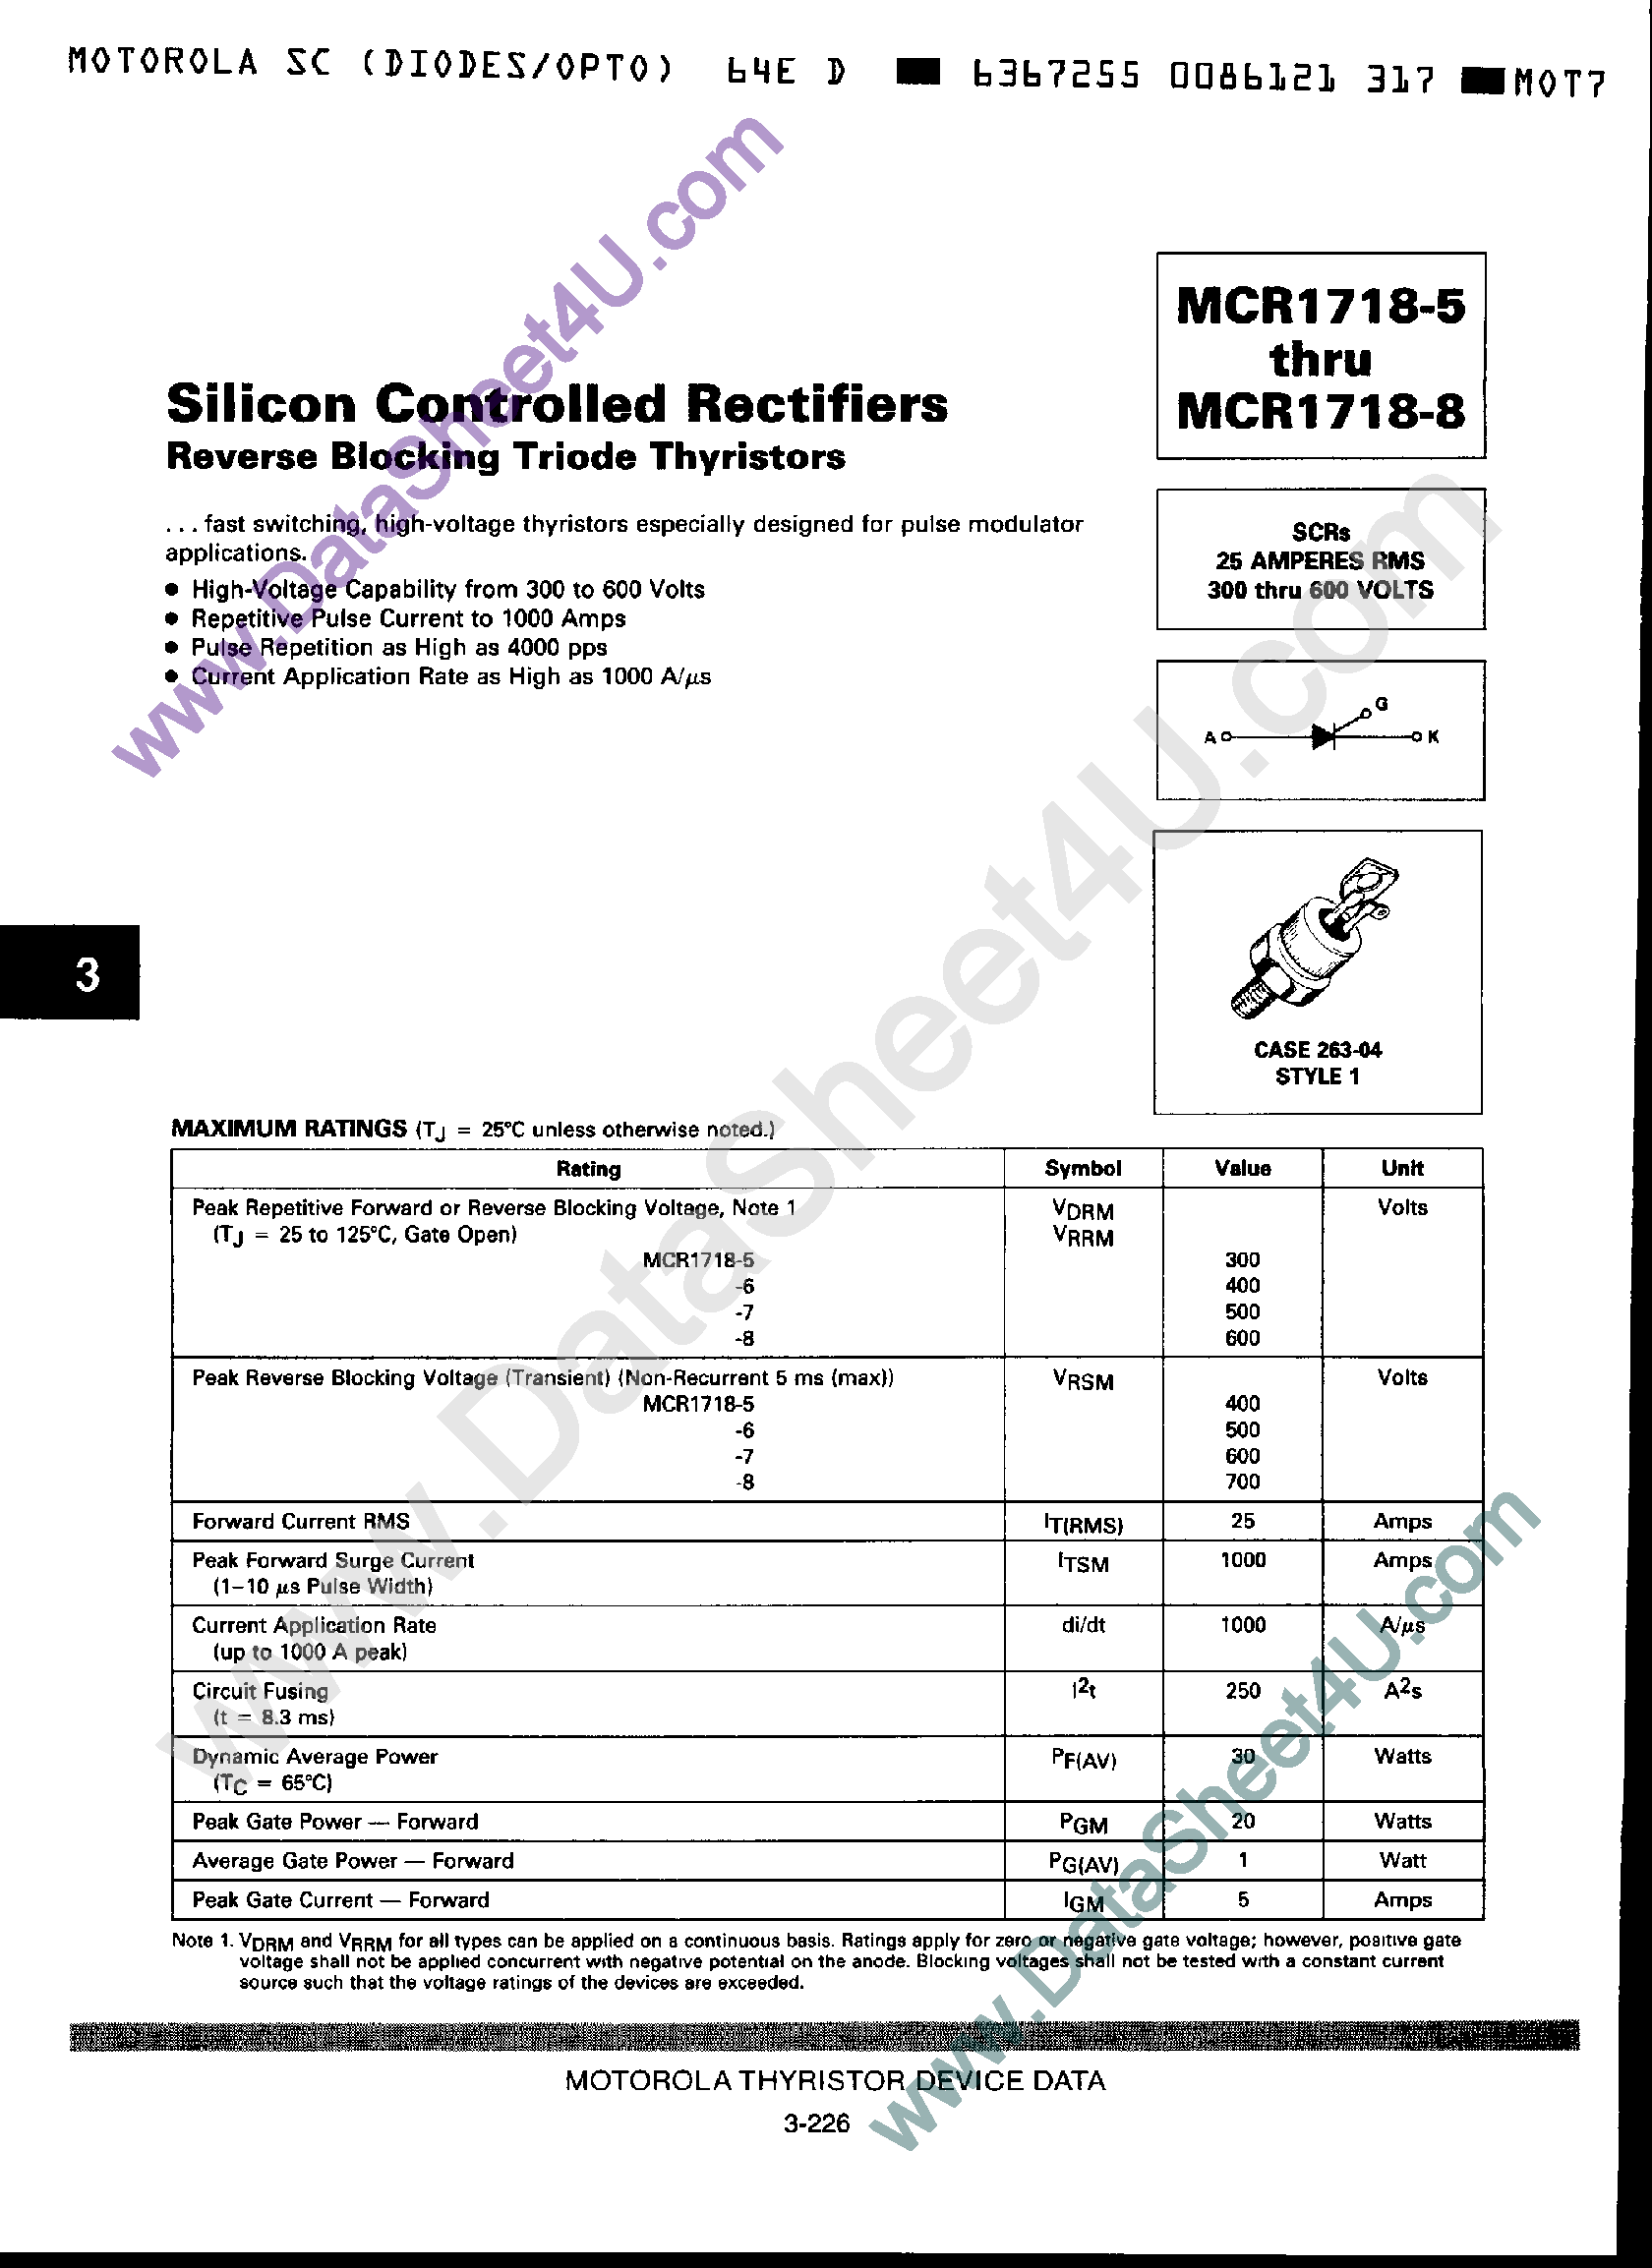 Datasheet MCR1718-5 - (MCR1718-5 - MCR1718-8) Silicon Controlled Rectifiers page 1